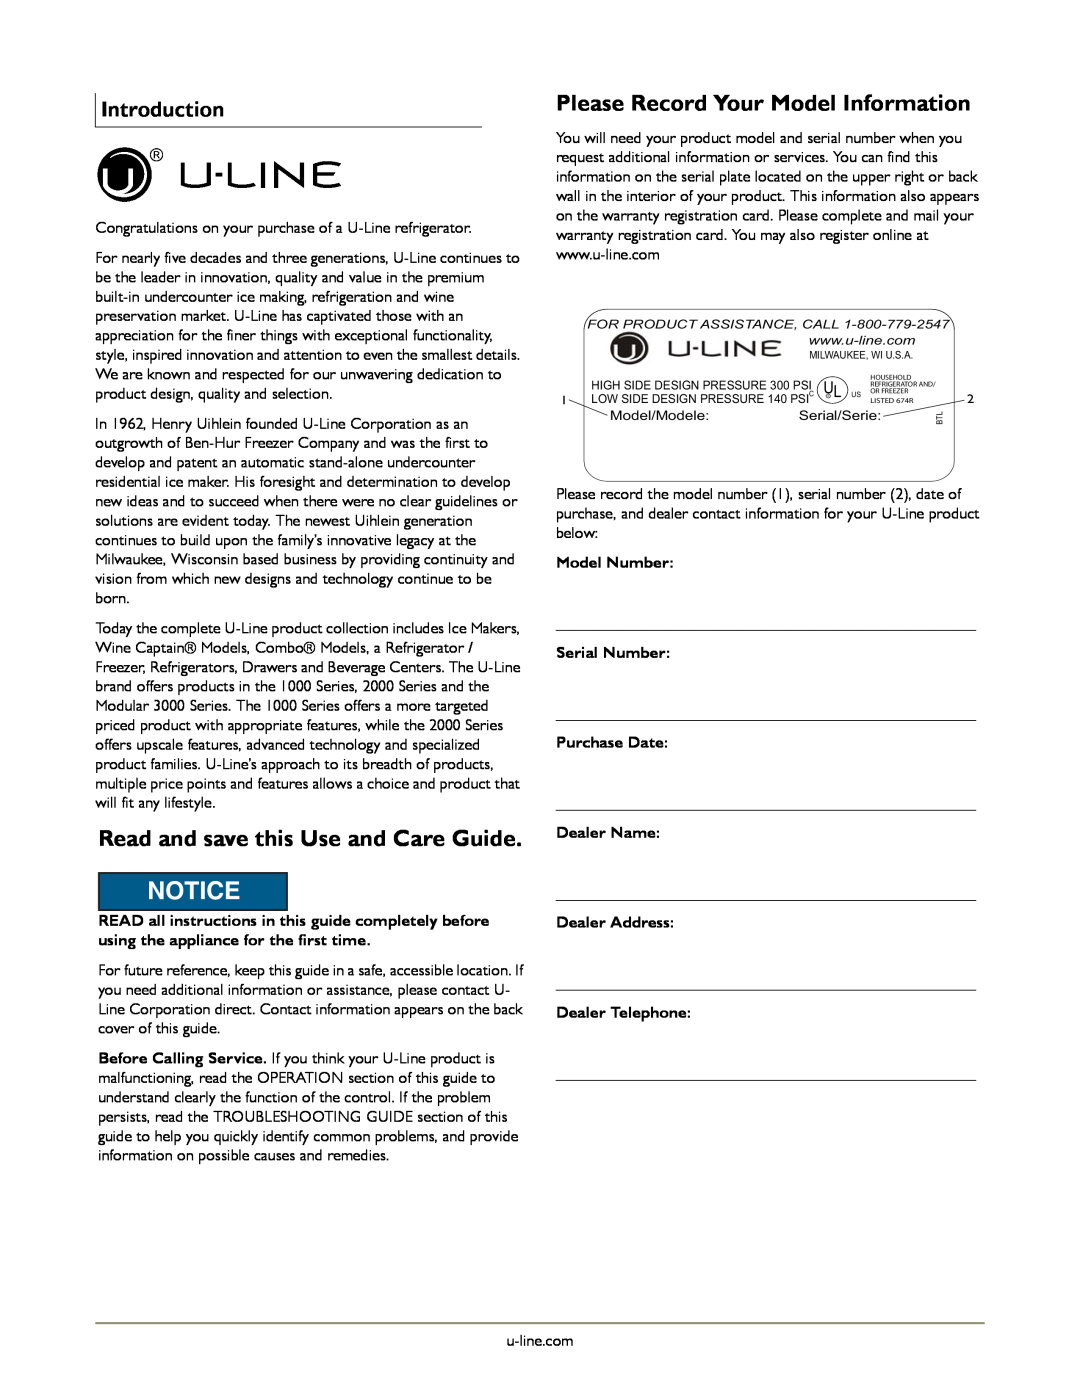 U-Line U-CO298-00 manual Read and save this Use and Care Guide, Please Record Your Model Information, Introduction 